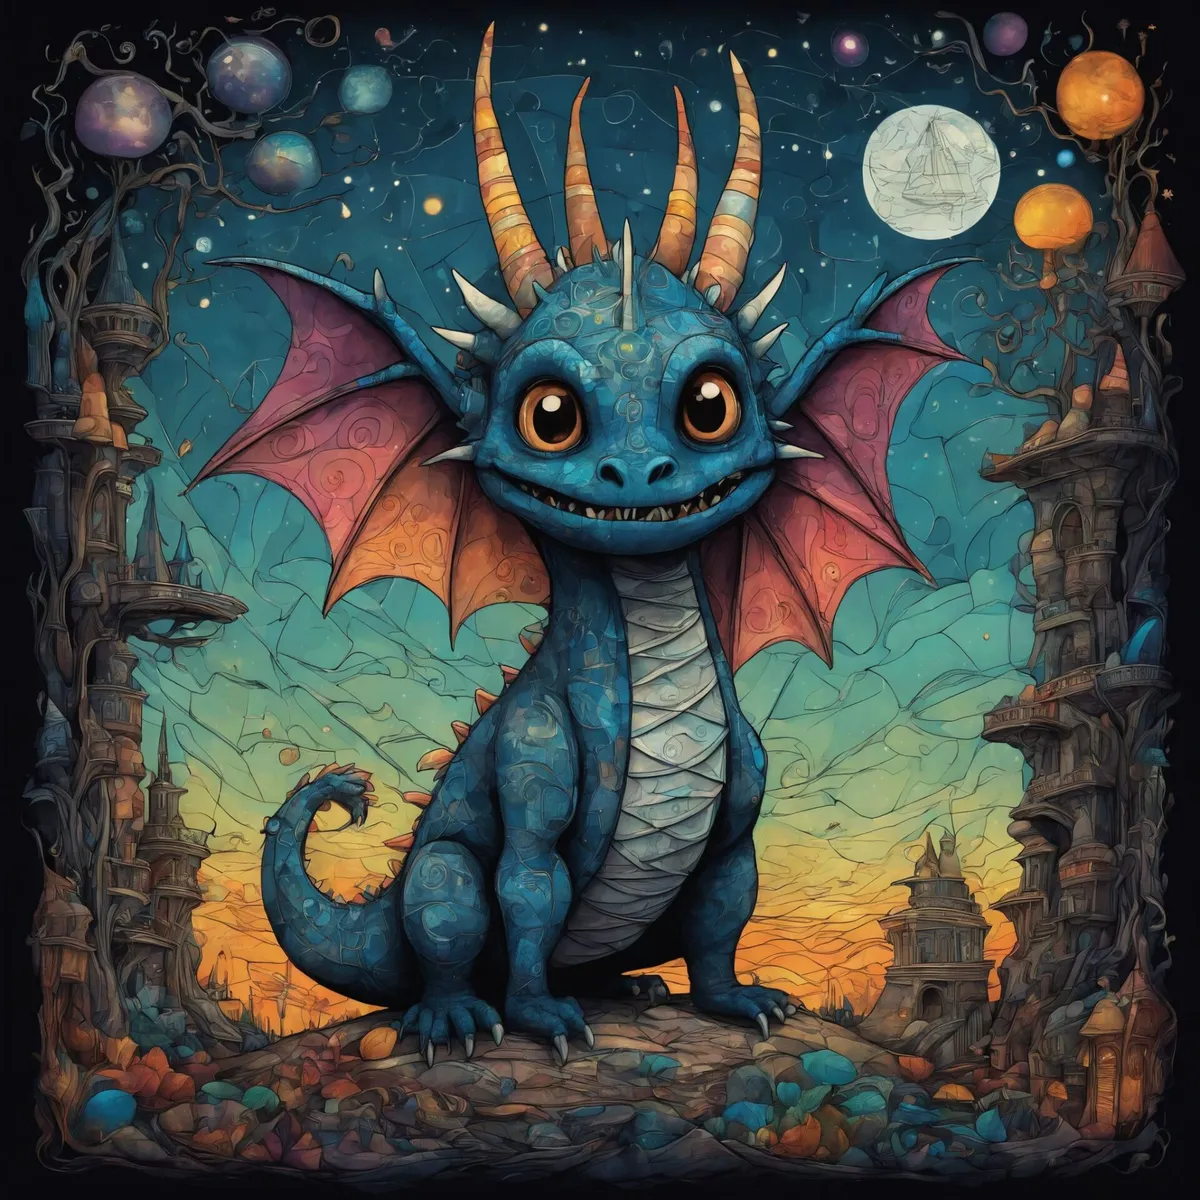 Whimsical illustration of a cute blue dragon with large eyes, orange horns, and pink wings, created using Stable Diffusion AI.